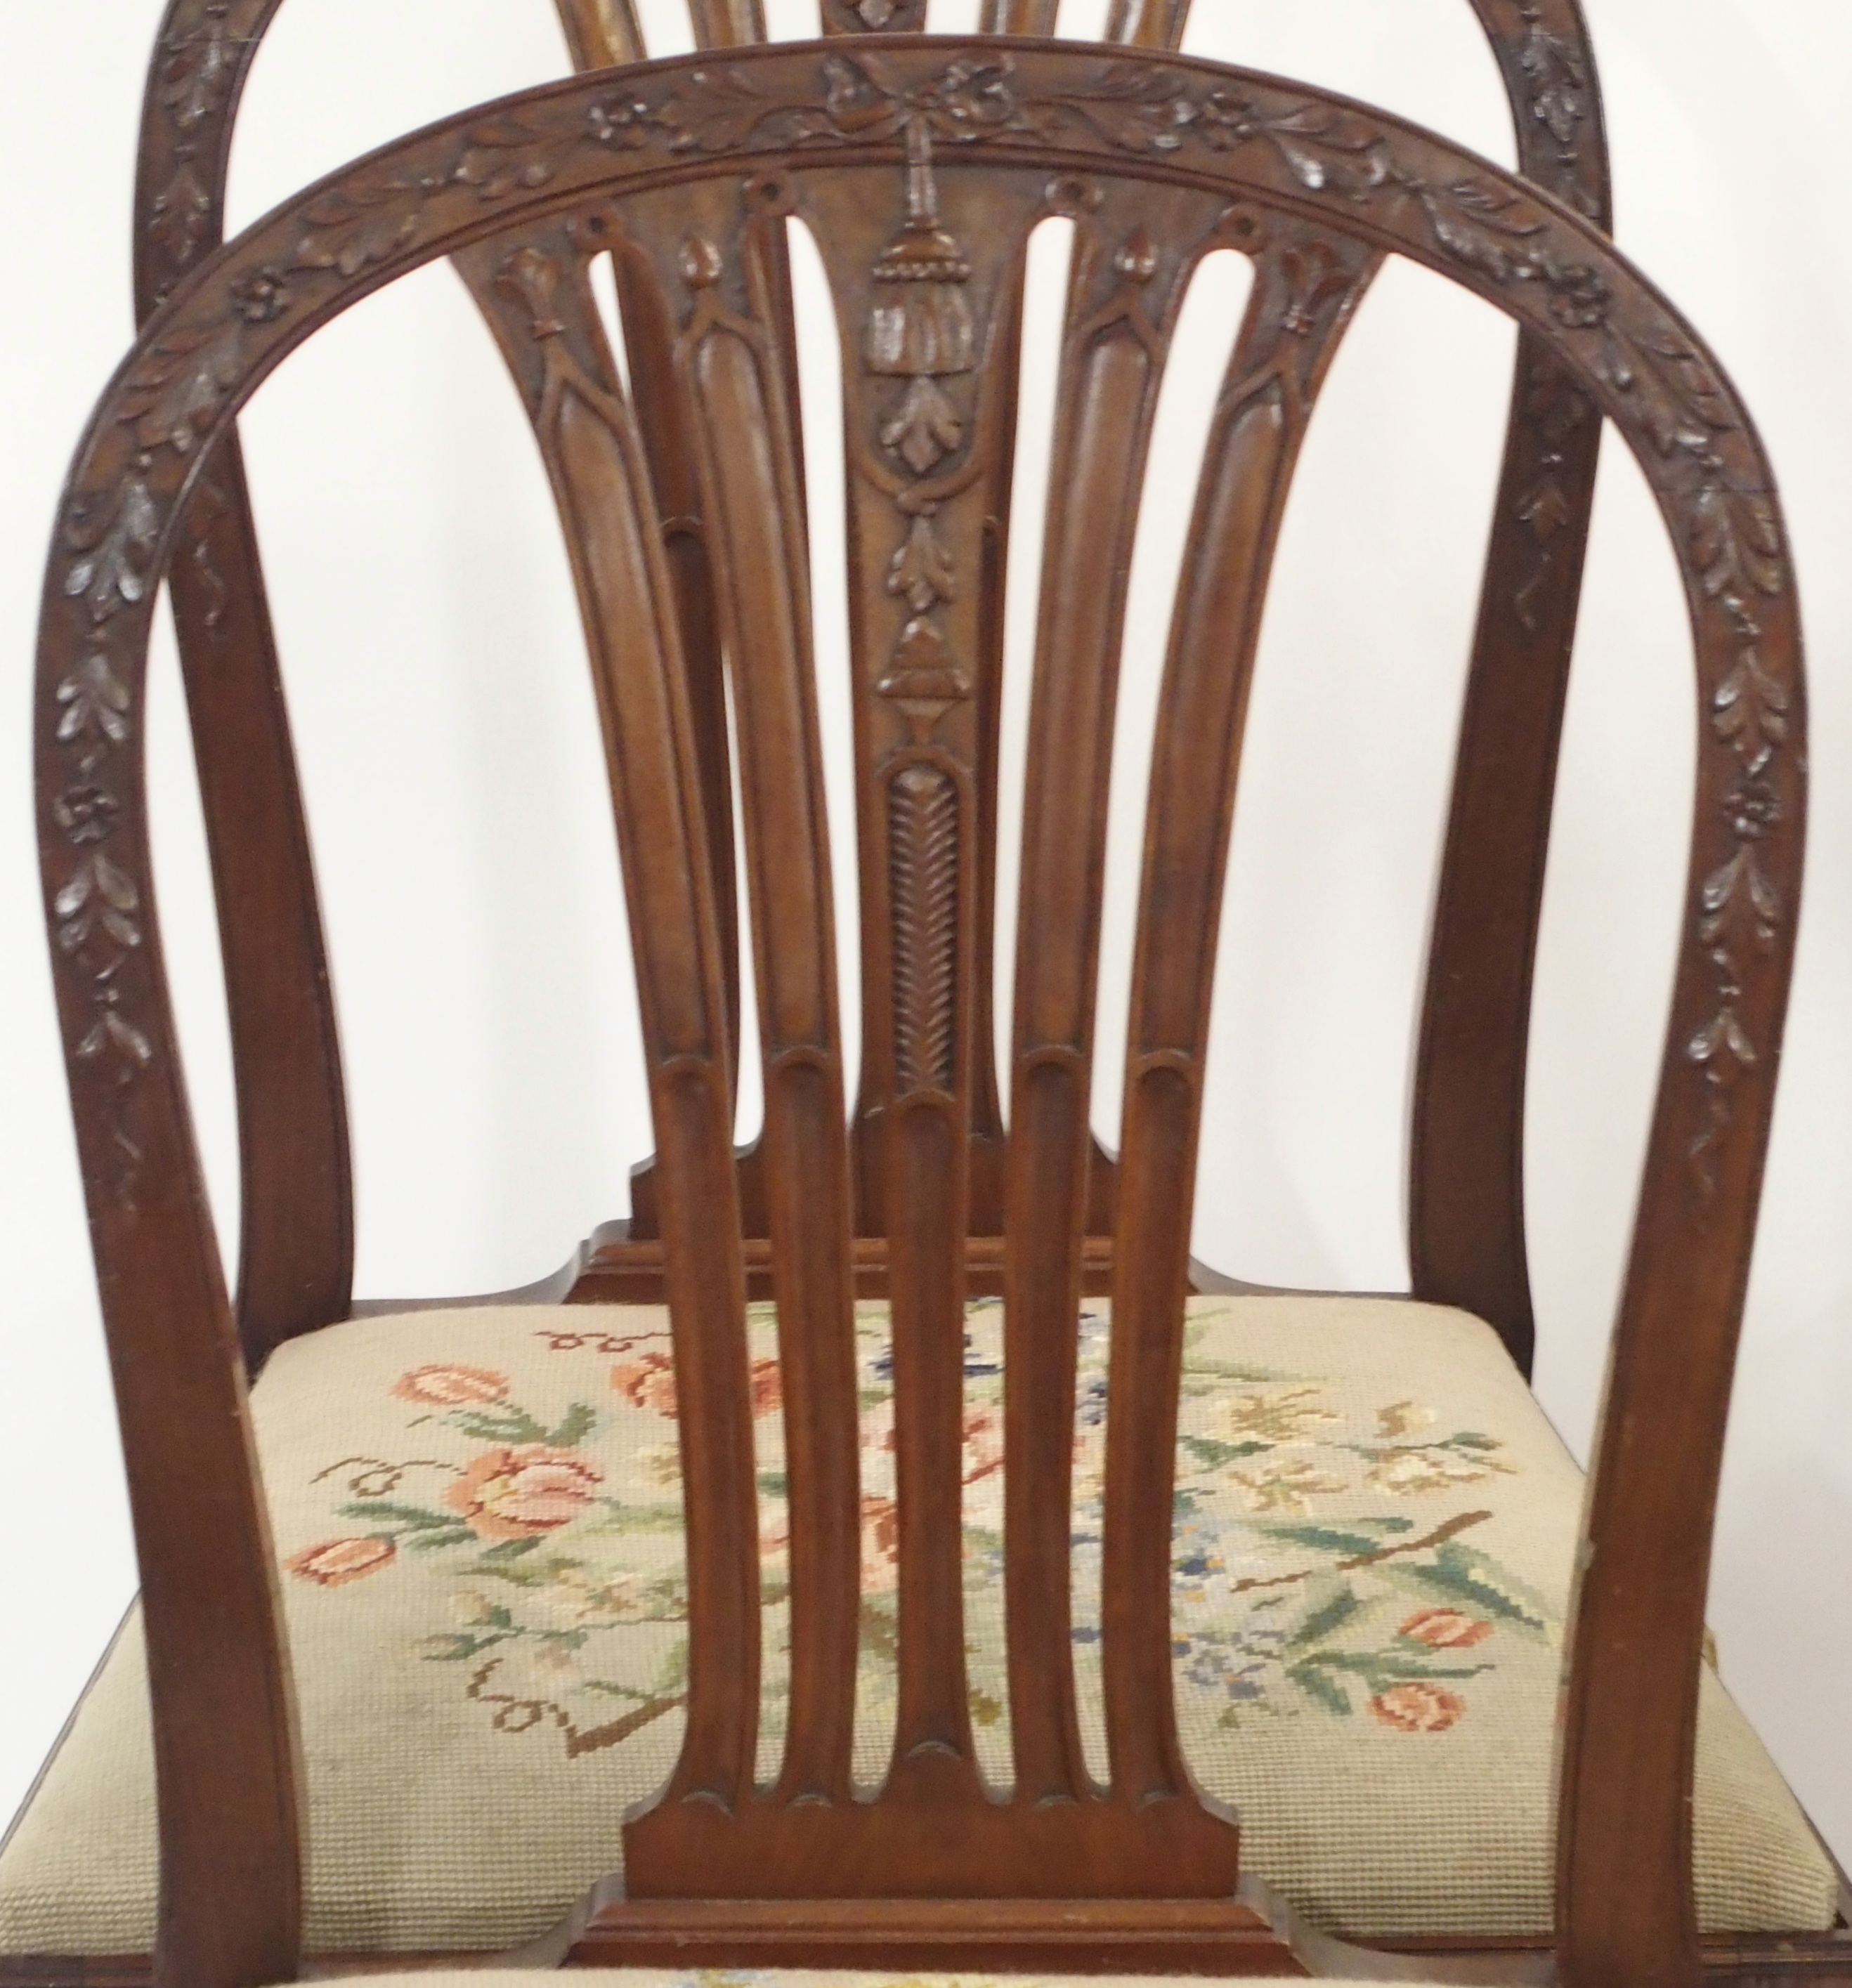 A set of six carved mahogany dining chairs with woolwork seats (John Taylor & Son, Edinburgh) (6) - Image 2 of 3